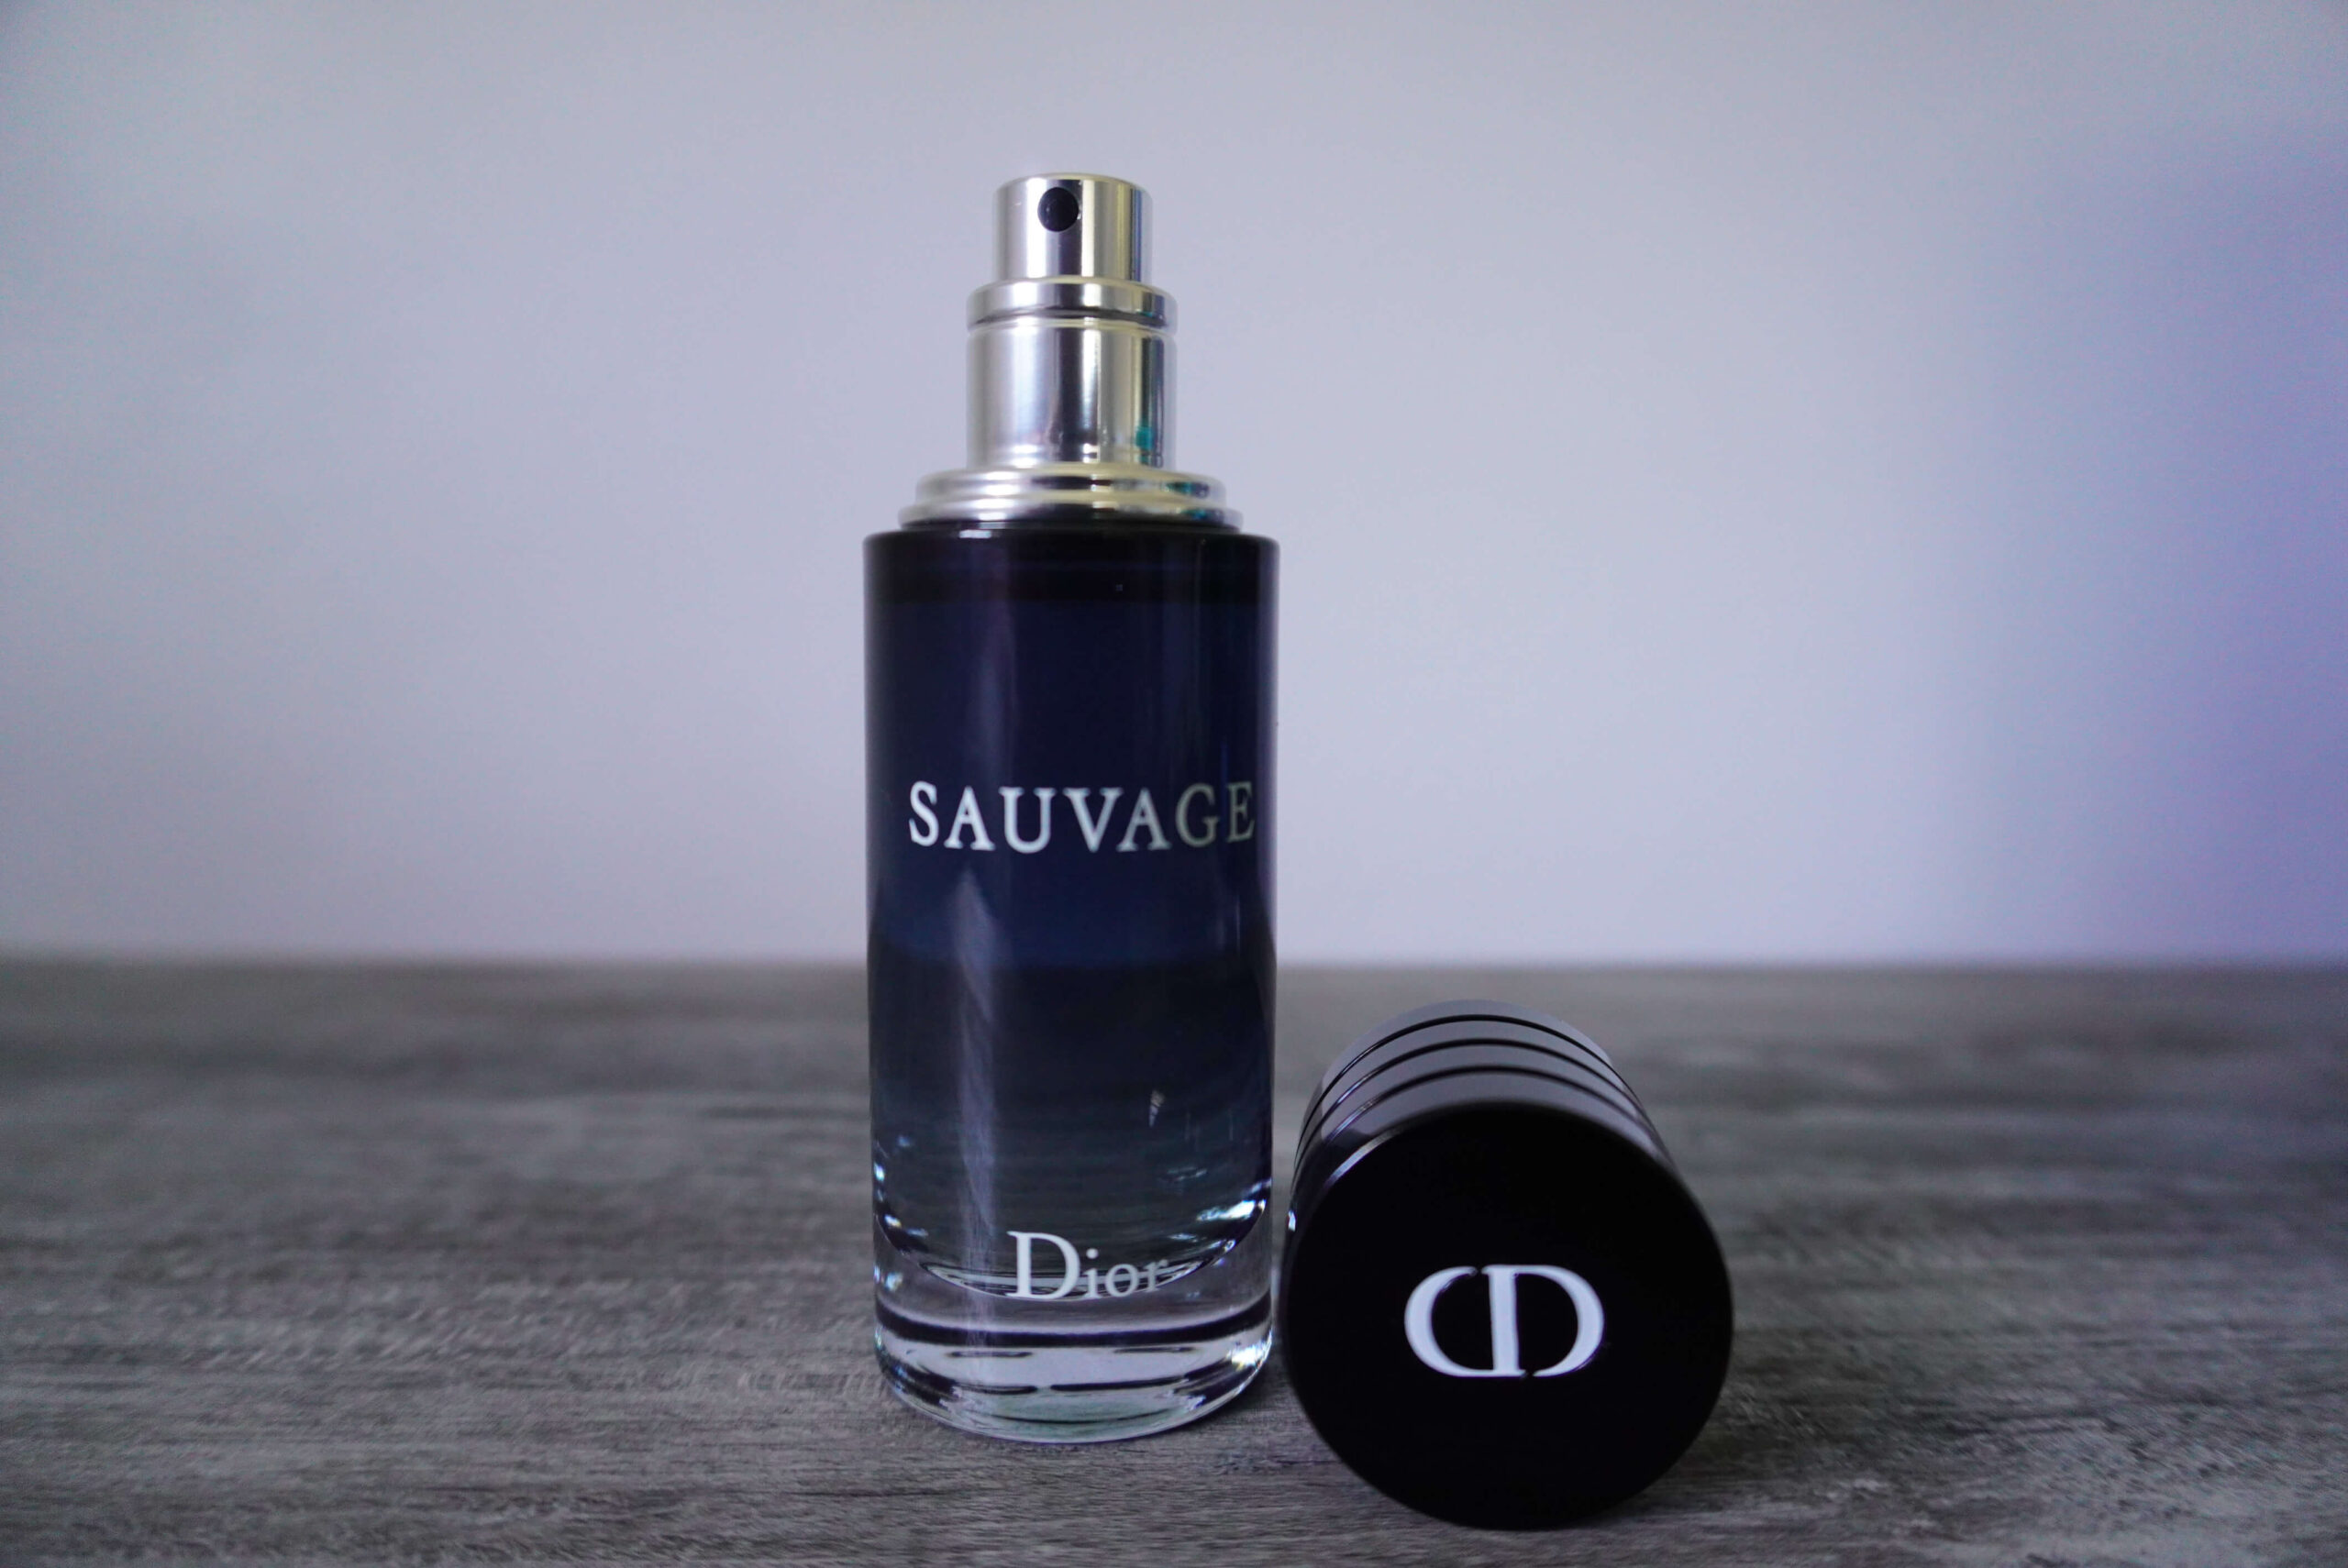 Image of Dior Sauvage bottle uncapped.